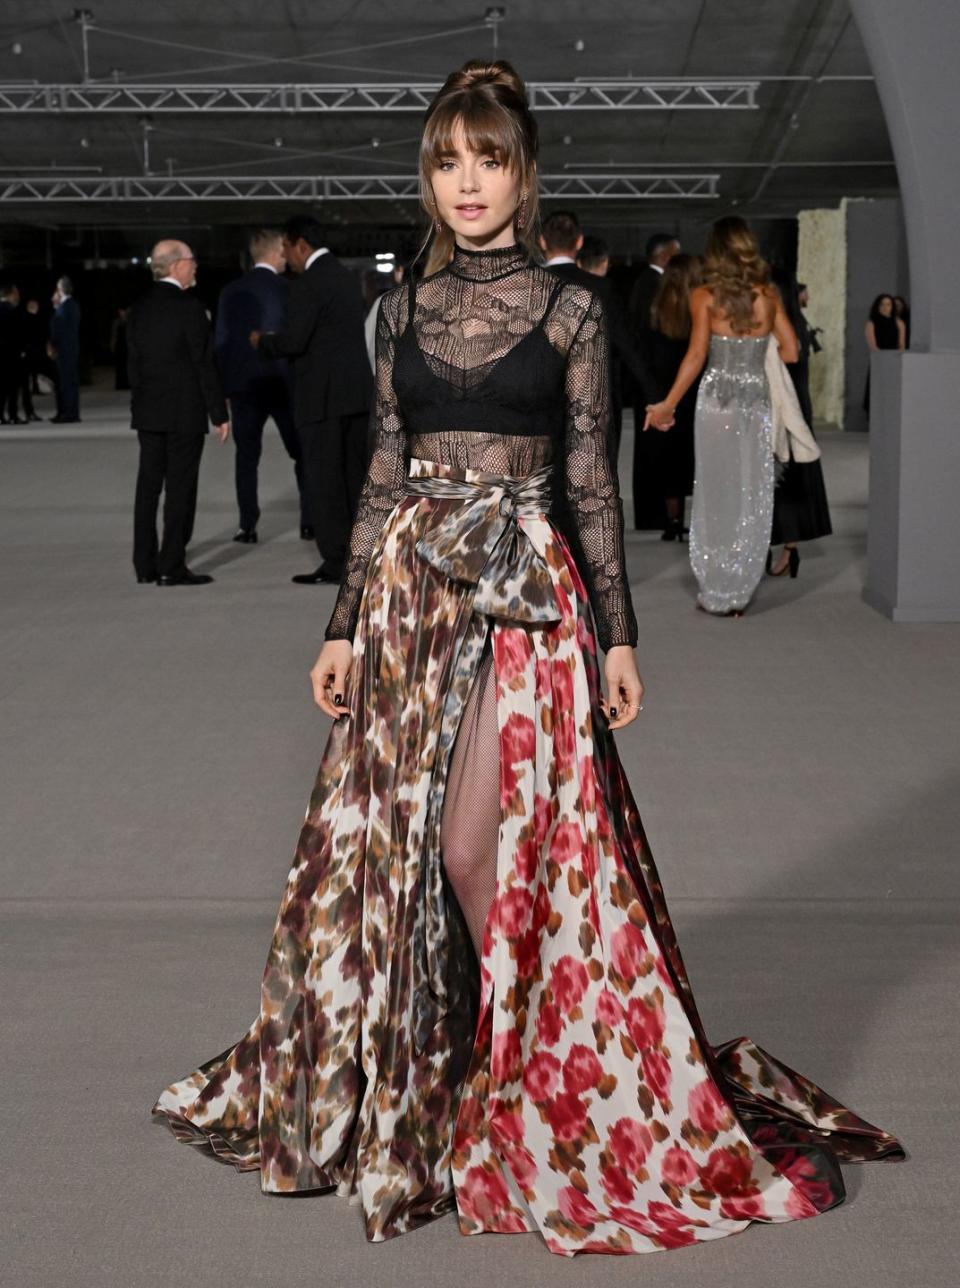 emily in paris cast lily collins see through lace gown